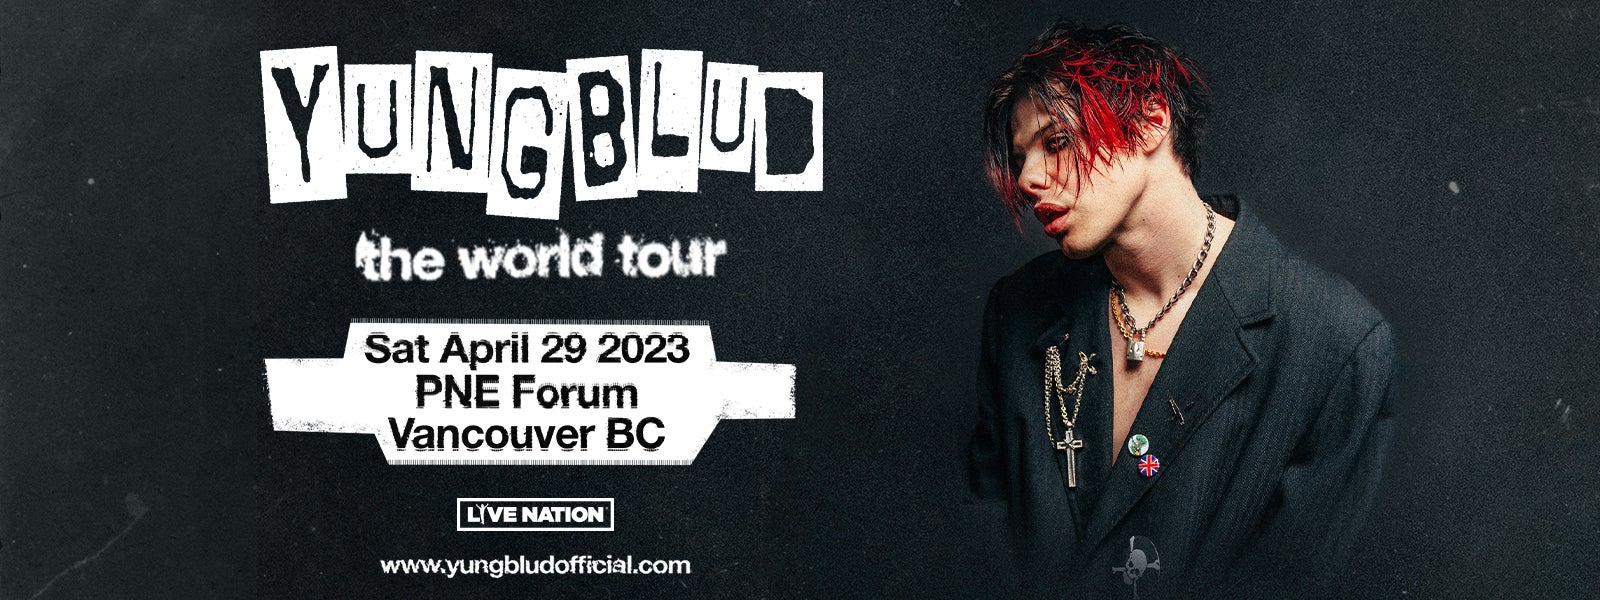 YUNGBLUD: The World Tour